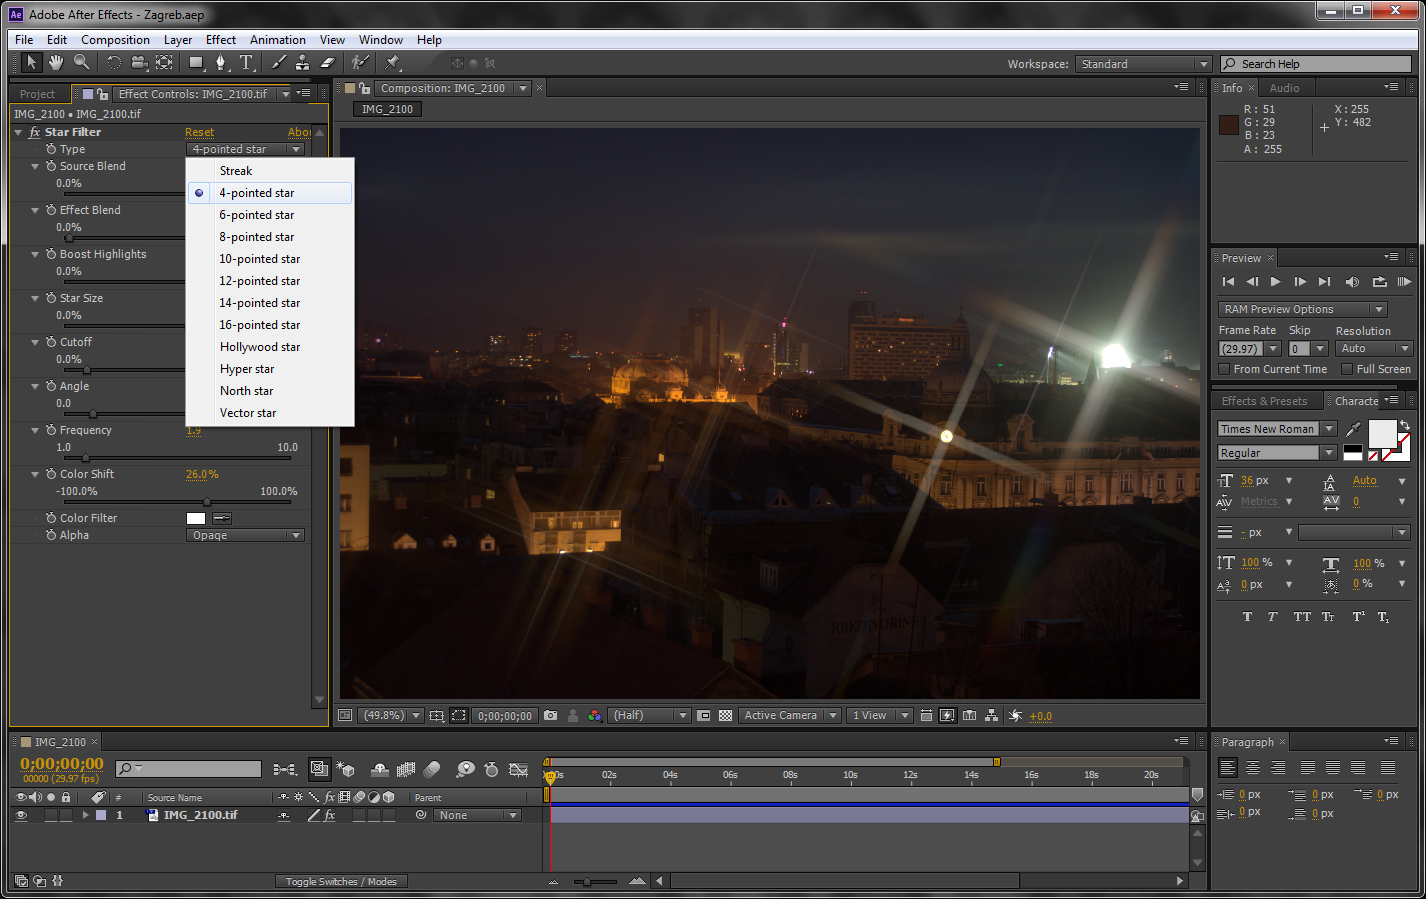 Adobe After Effects Cs5 Plugins Free Download For Mac